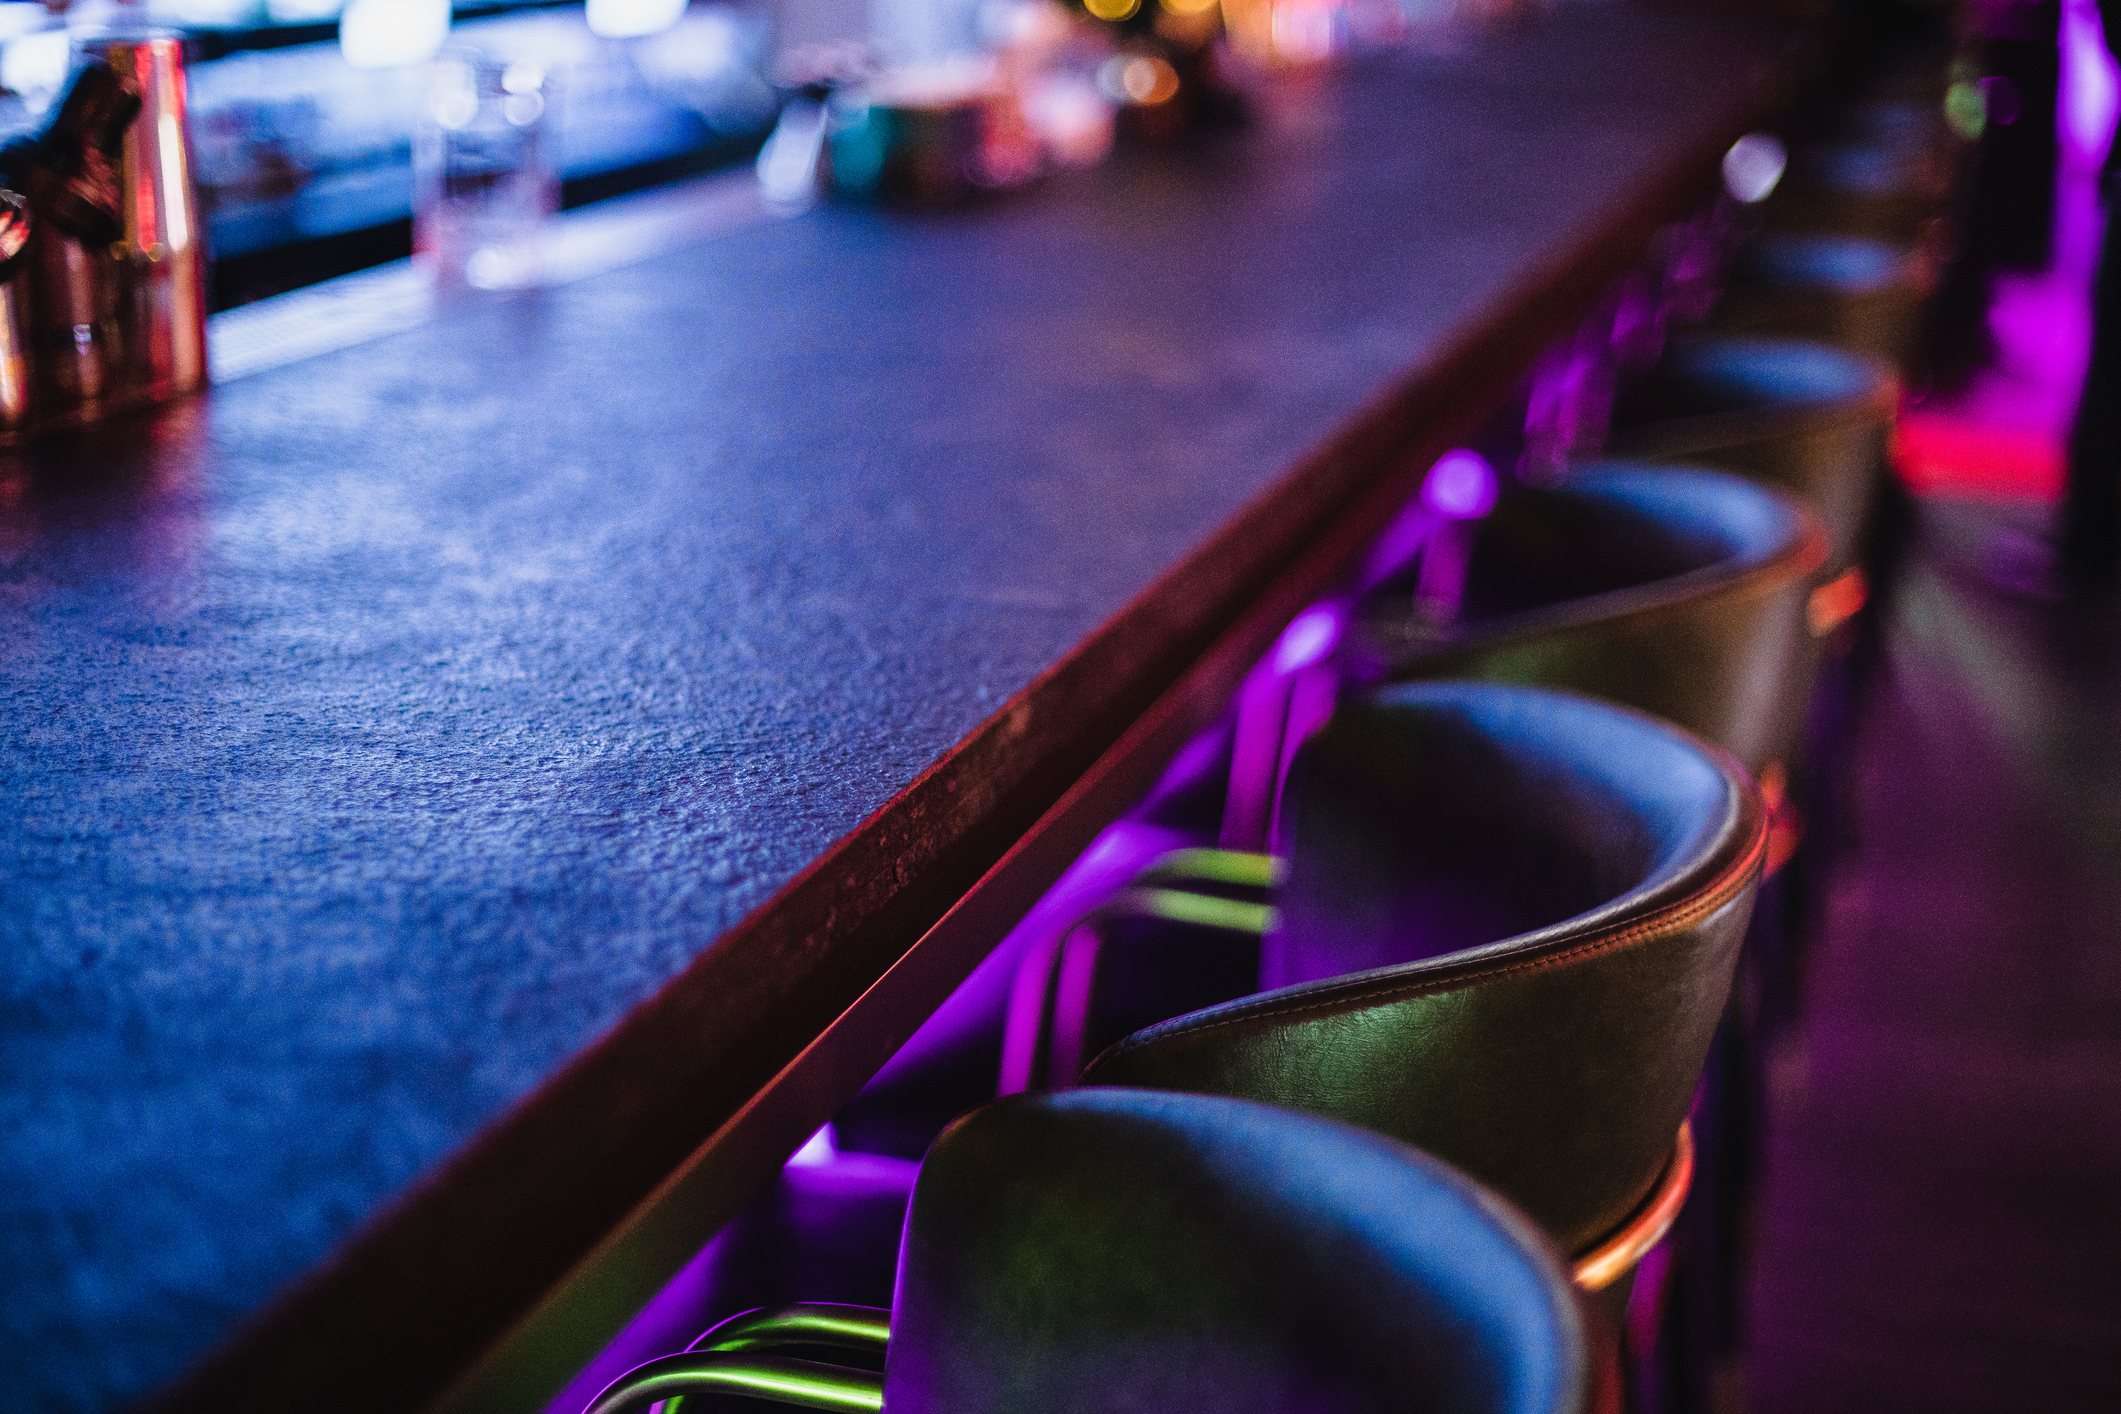 Empty bar counter with stools in a dimly lit setting, suggestive of a quiet nightlife scene